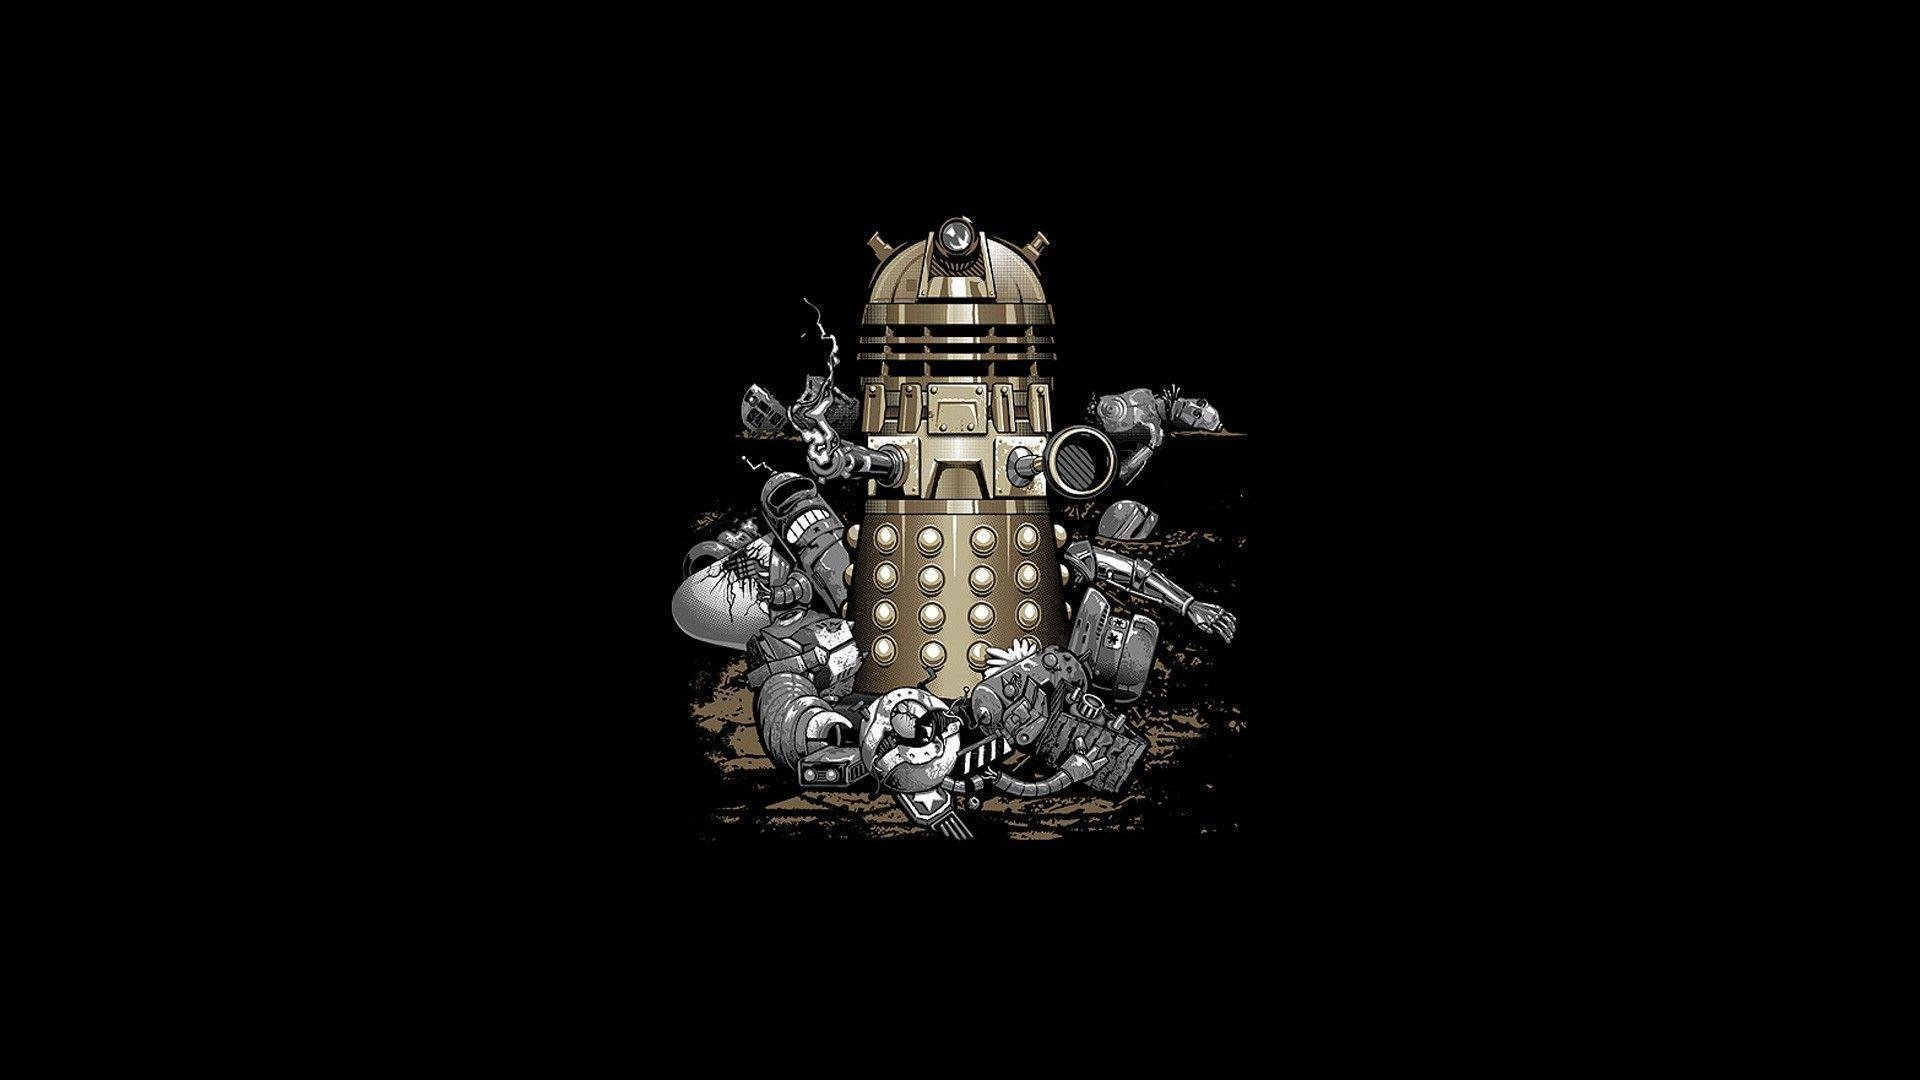 Daleks Doctor Who Wallpapers 1920x1080PX ~ Wallpapers Doctor Who Hd